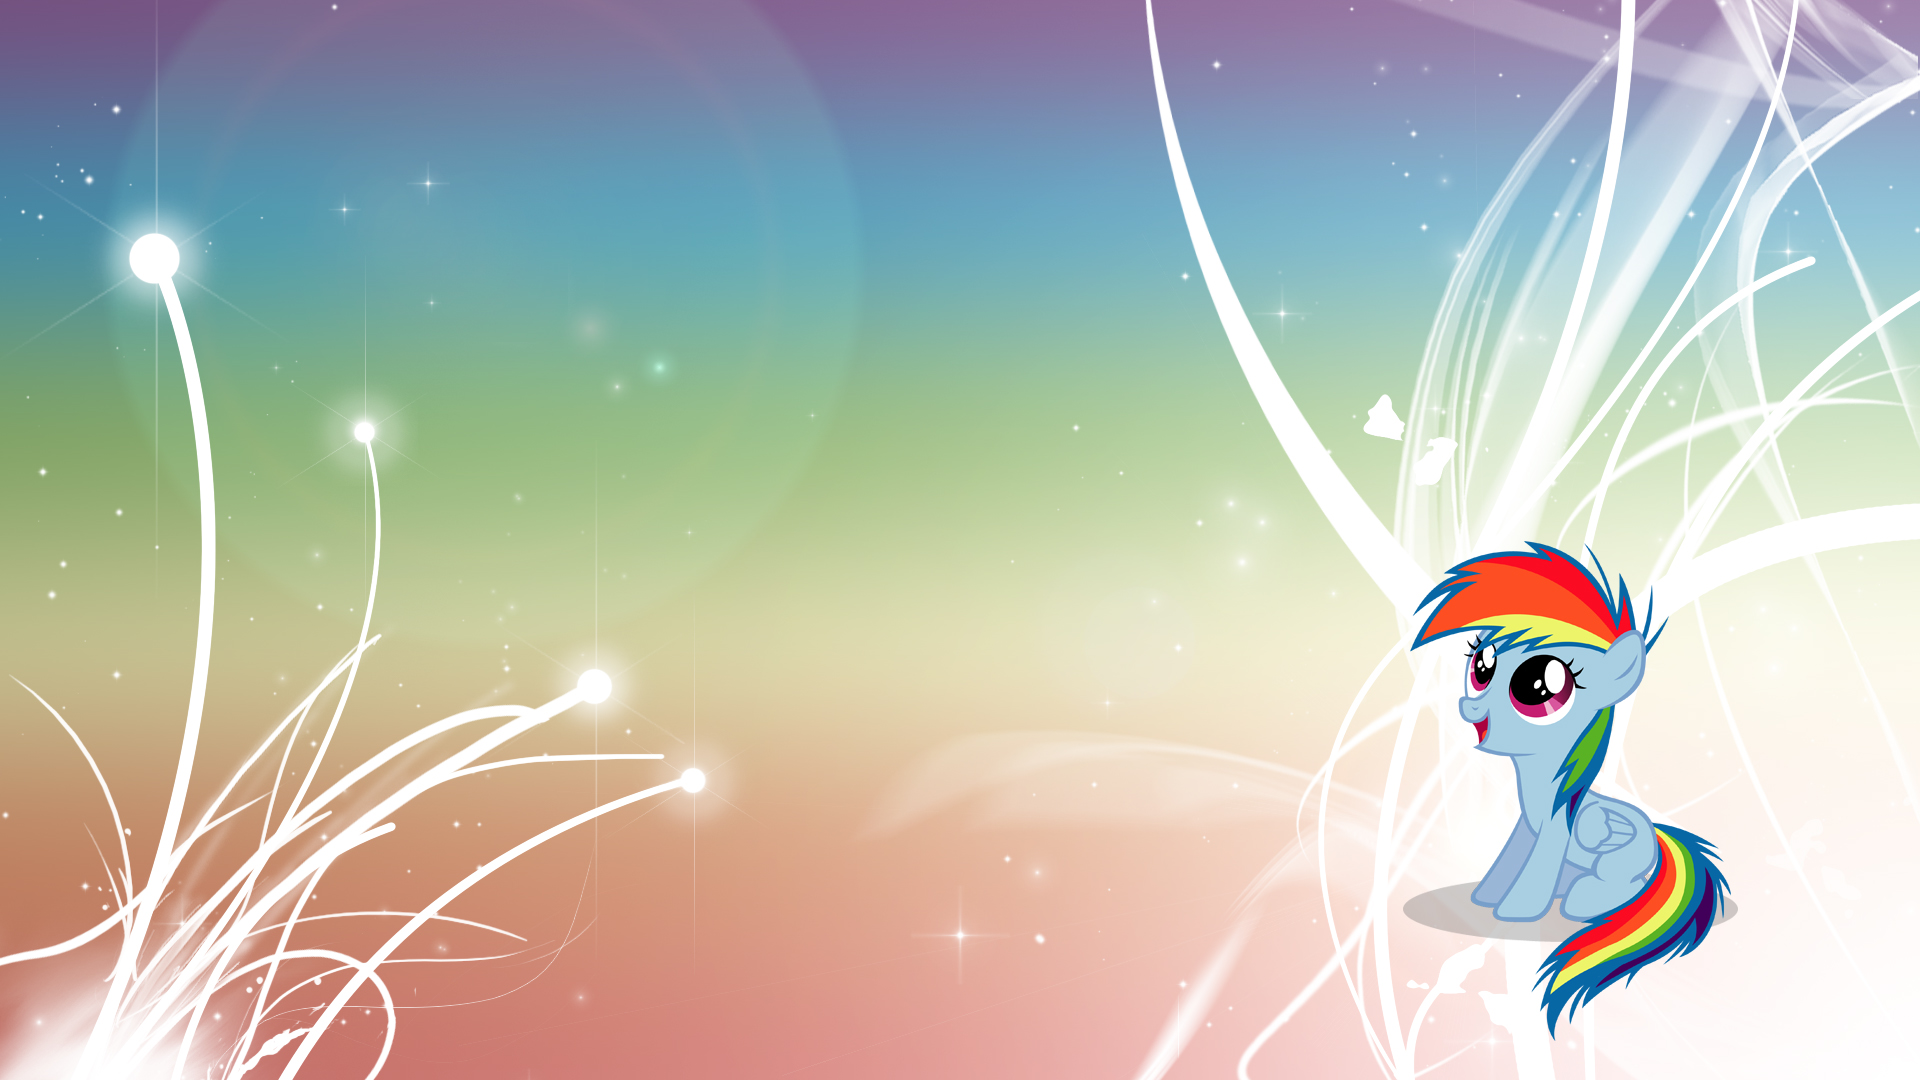 Rainbow Dash - V4 - Filly by Capt-Nemo and Unfiltered-N